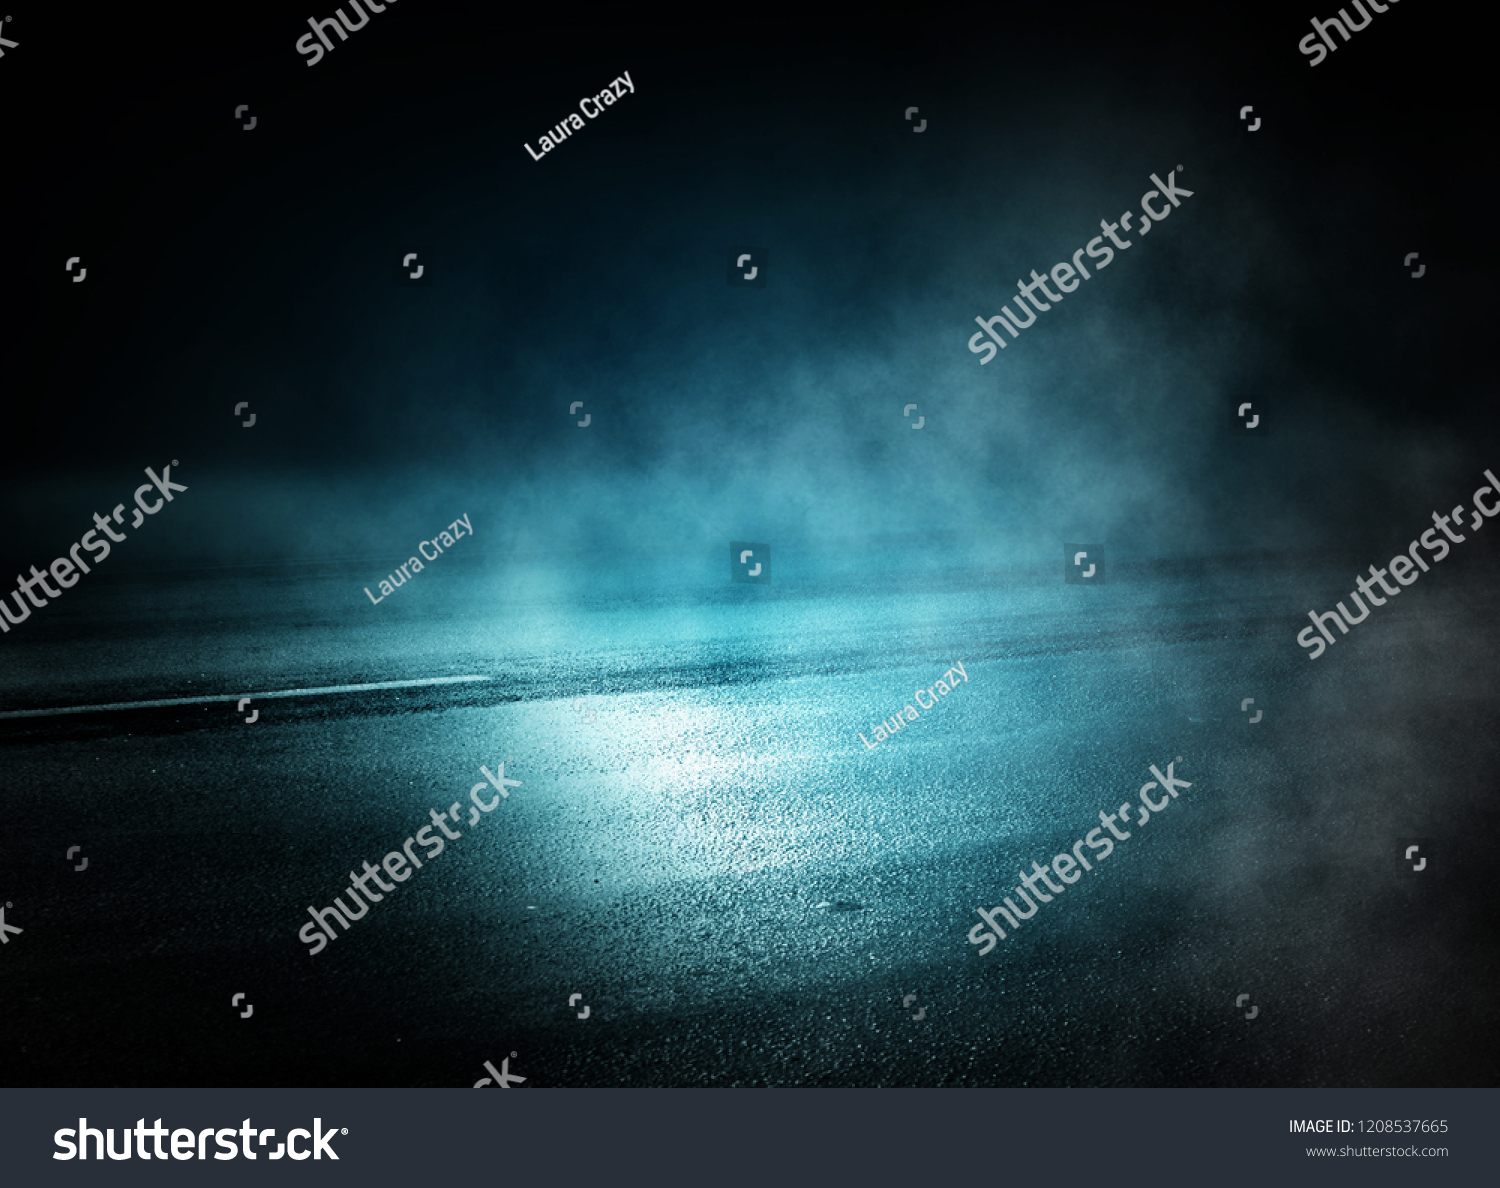 background of empty room at night, concrete floors and walls, neon light, fog, smoke, smog #1208537665